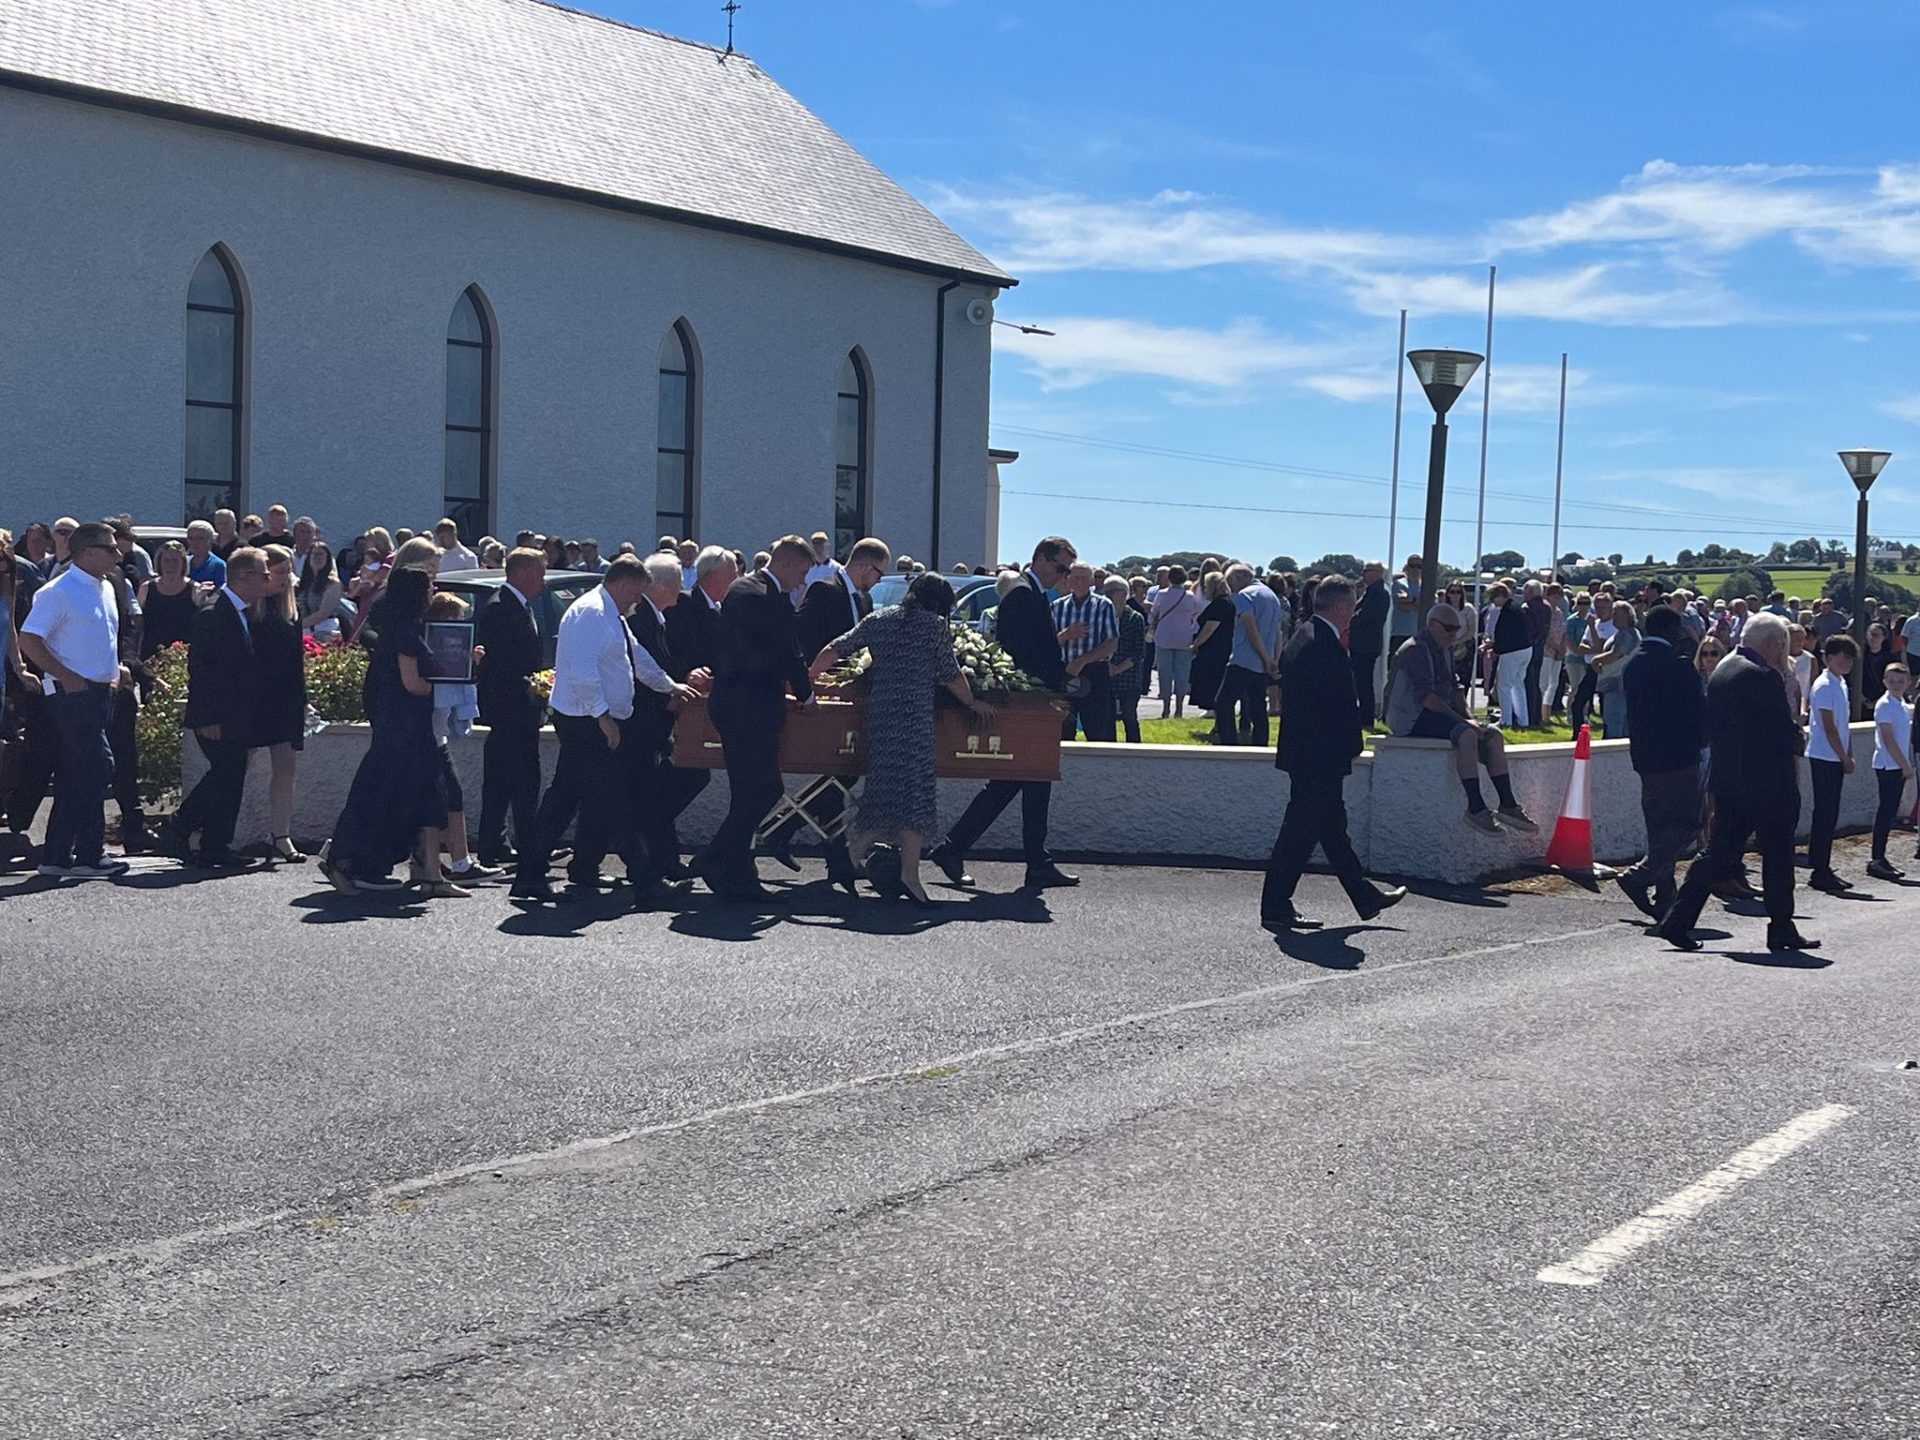 Locals in Roscommon left reeling after drowning of brother and sister  Dessie Byrne and Muriel Eriksson off Ballybunion in Kerry